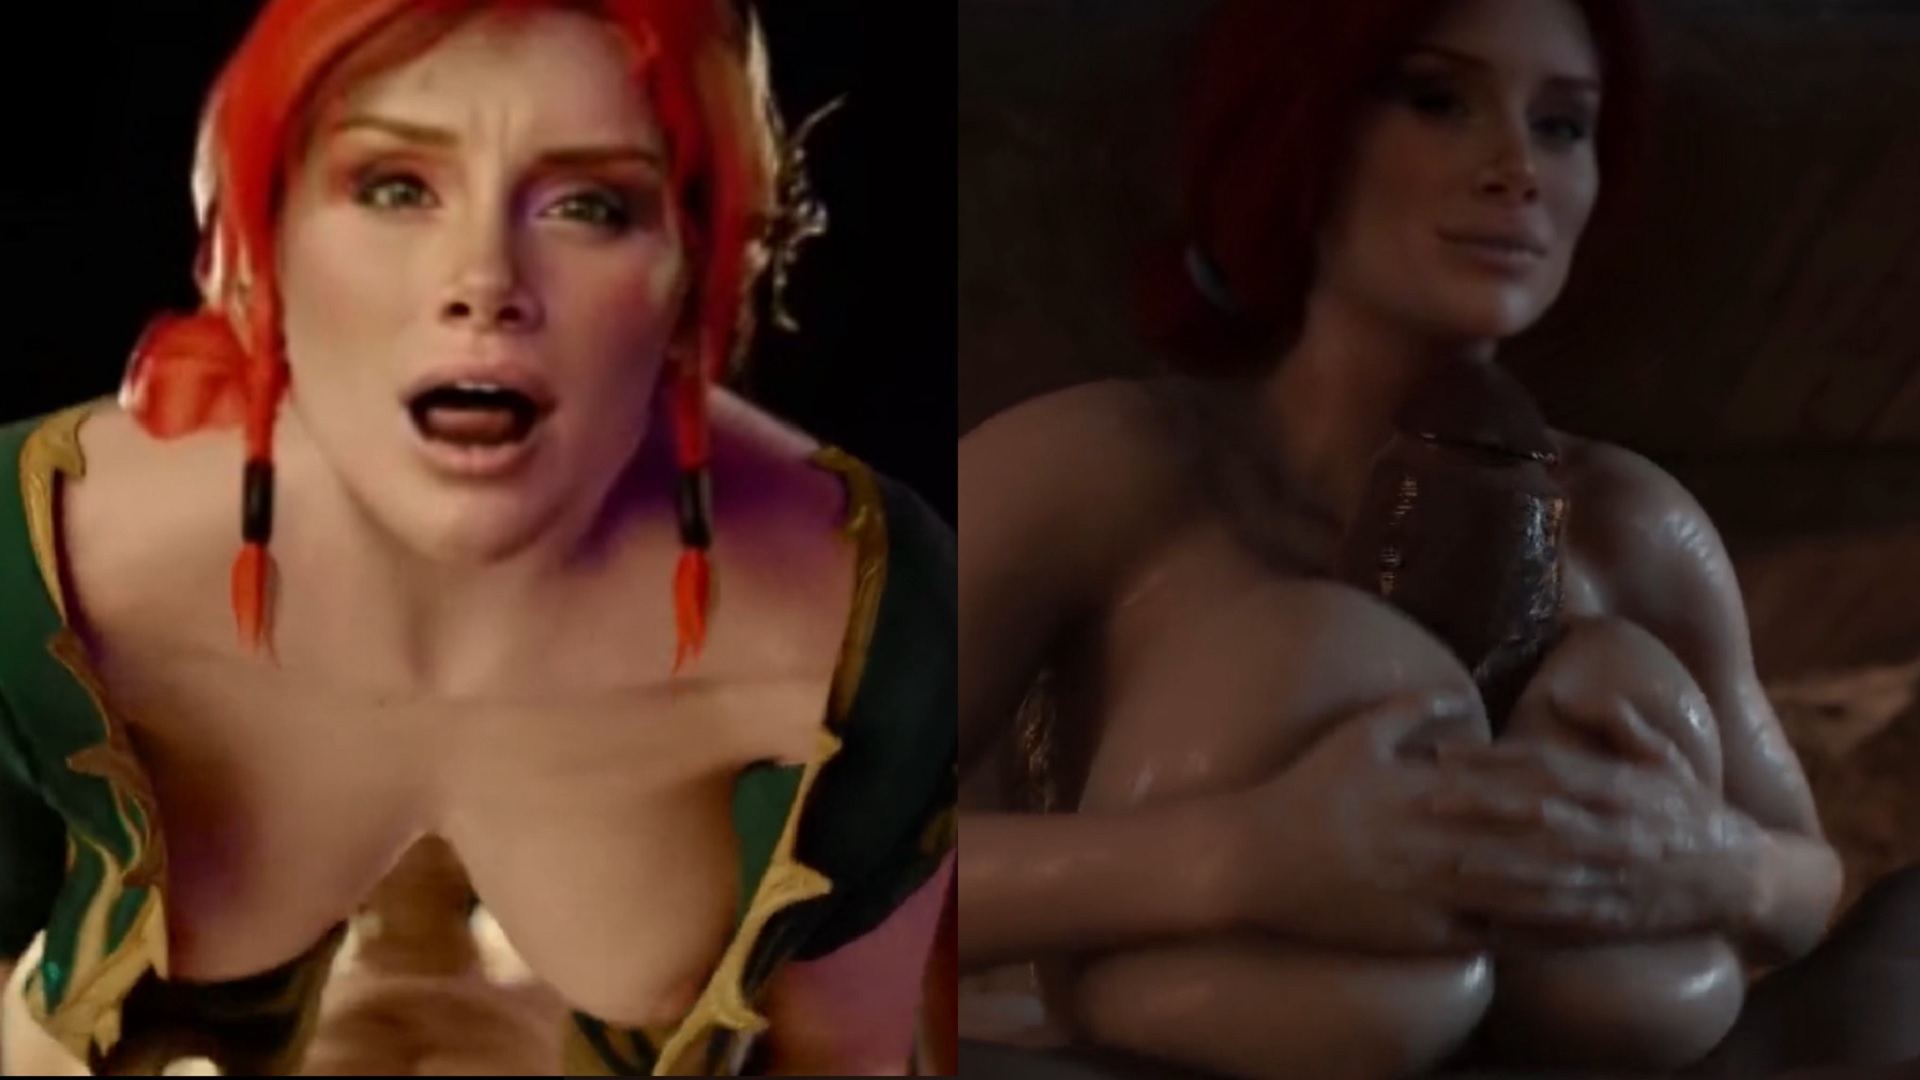 Bryce dallas howard nude and sex tape leaked!